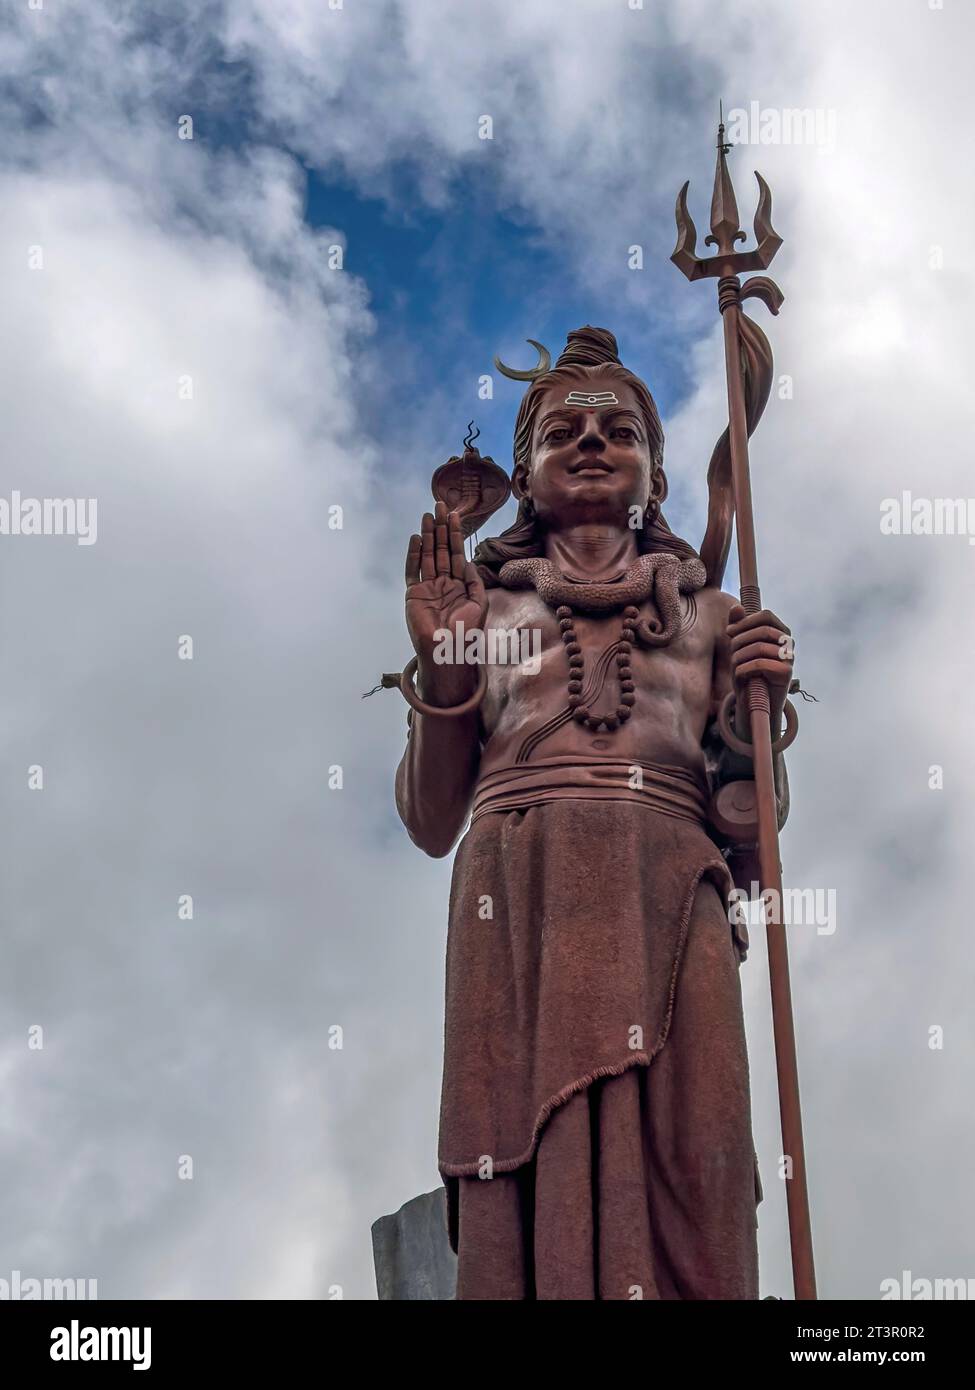 View of giant statue of Lord Shiva at Grand Bassin, Ganga Talao religious site in Mauritius Stock Photo